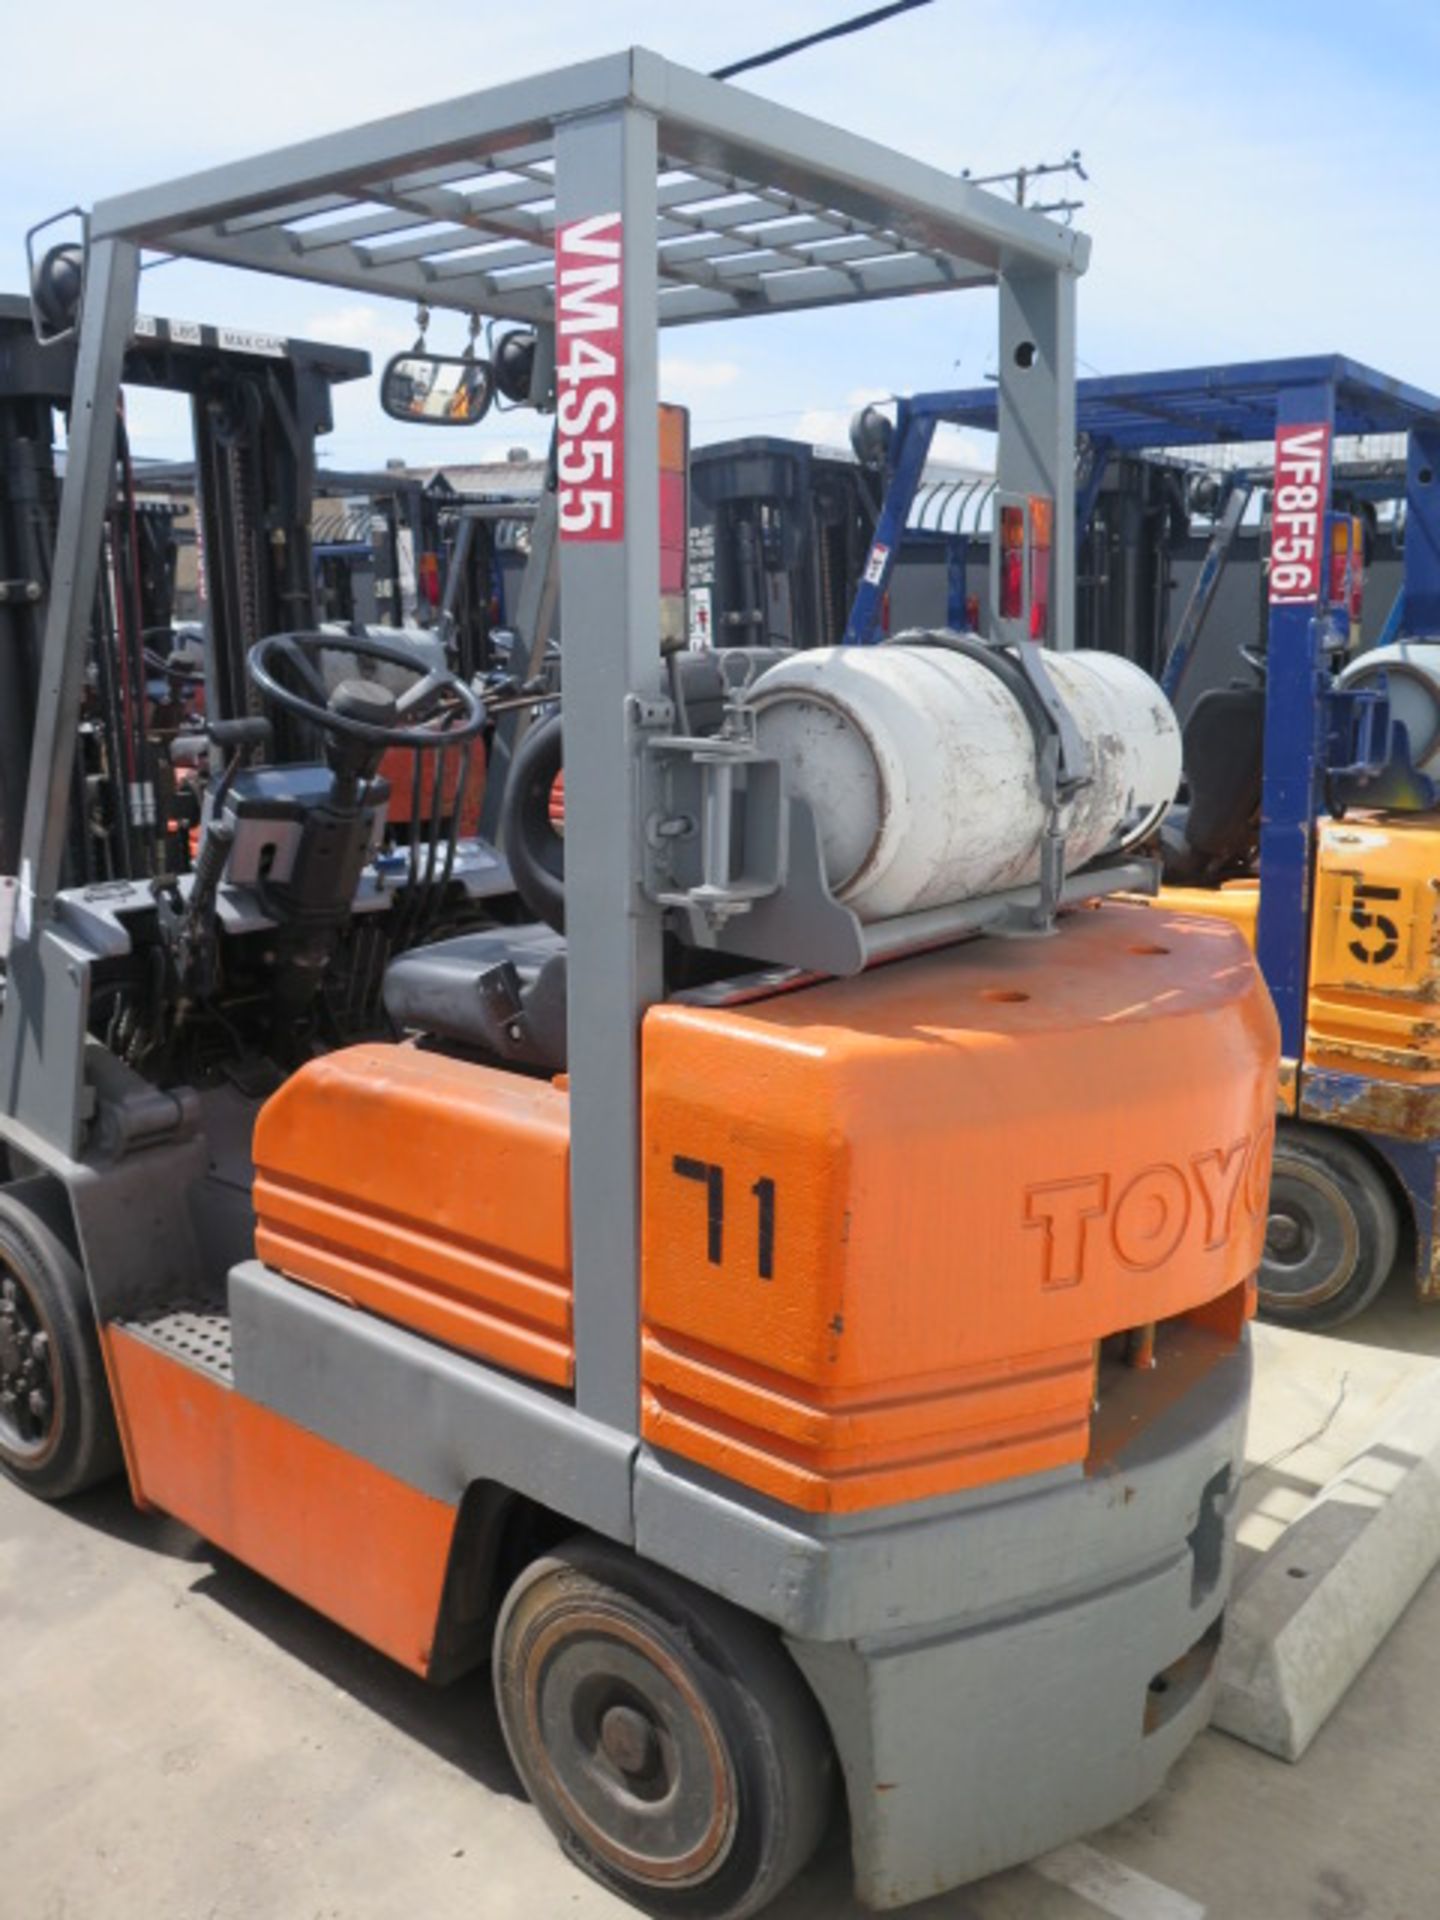 Toyota 5FGC25 5000 Lb Cap LPG Forklift s/n 5FGCU25-84777 w/ 3-Stage Mast, 169" Lift Height, - Image 3 of 12